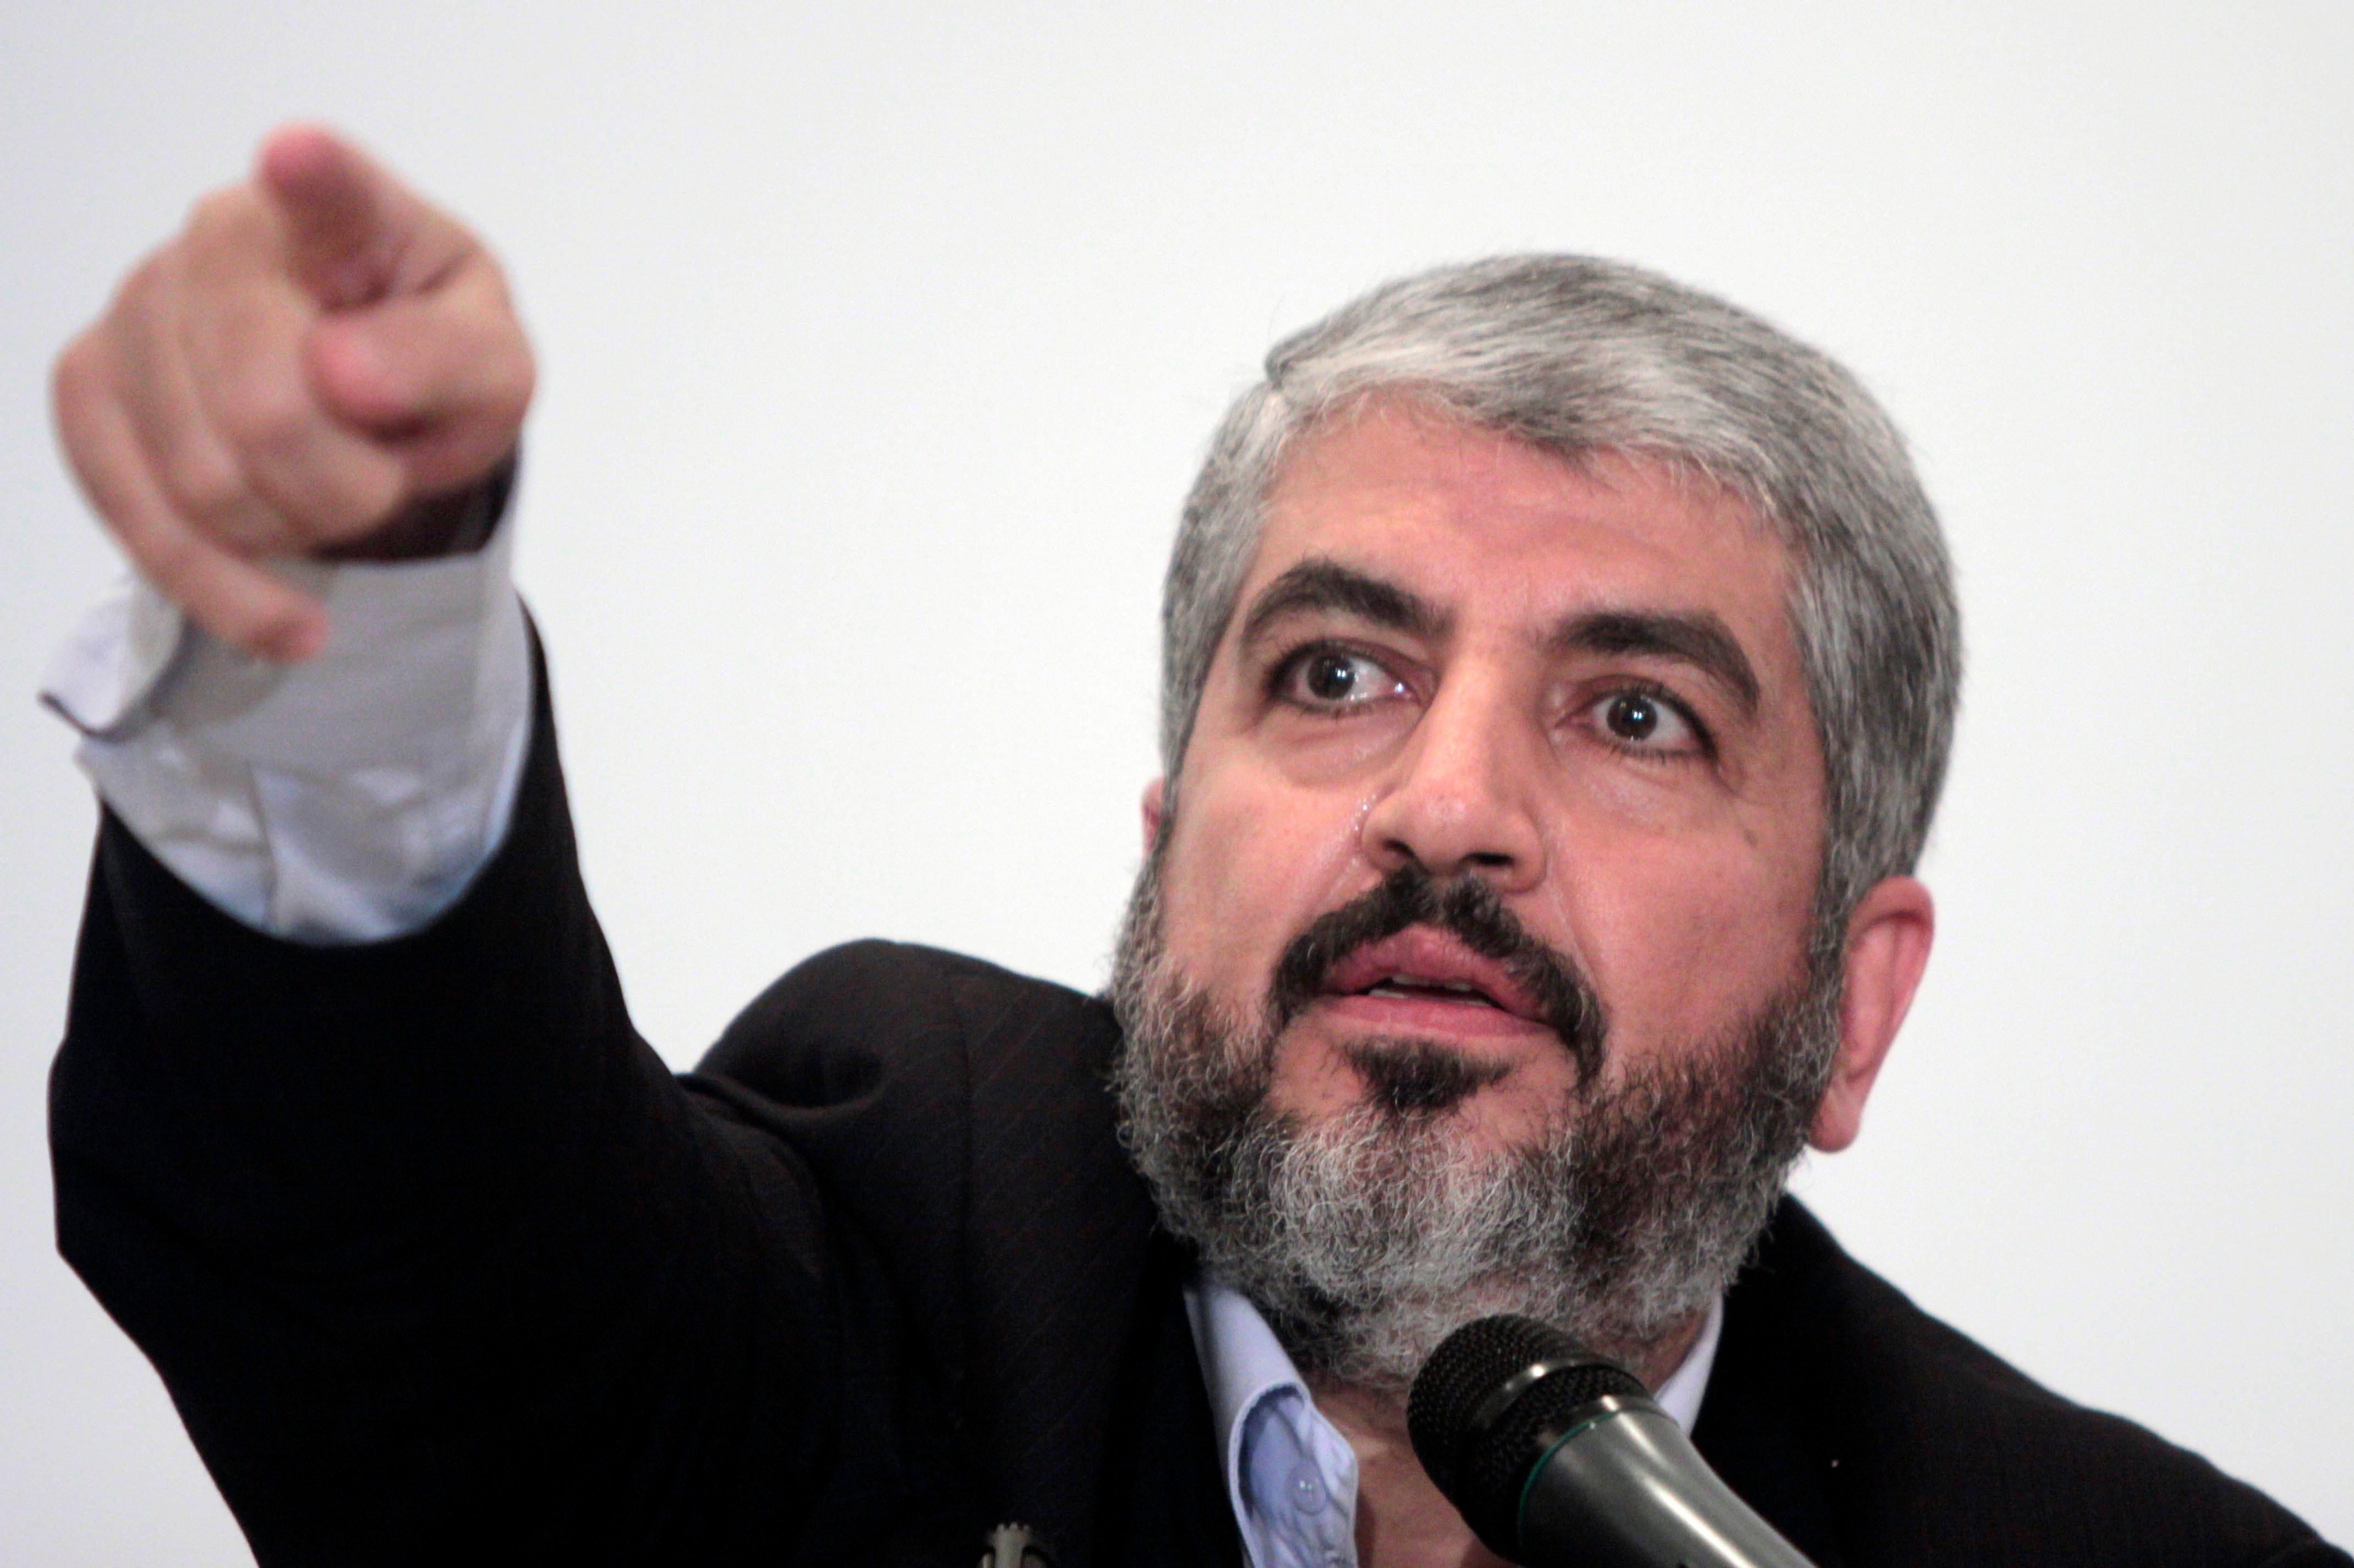 One of Hamas’s founders Khaled Meshaal